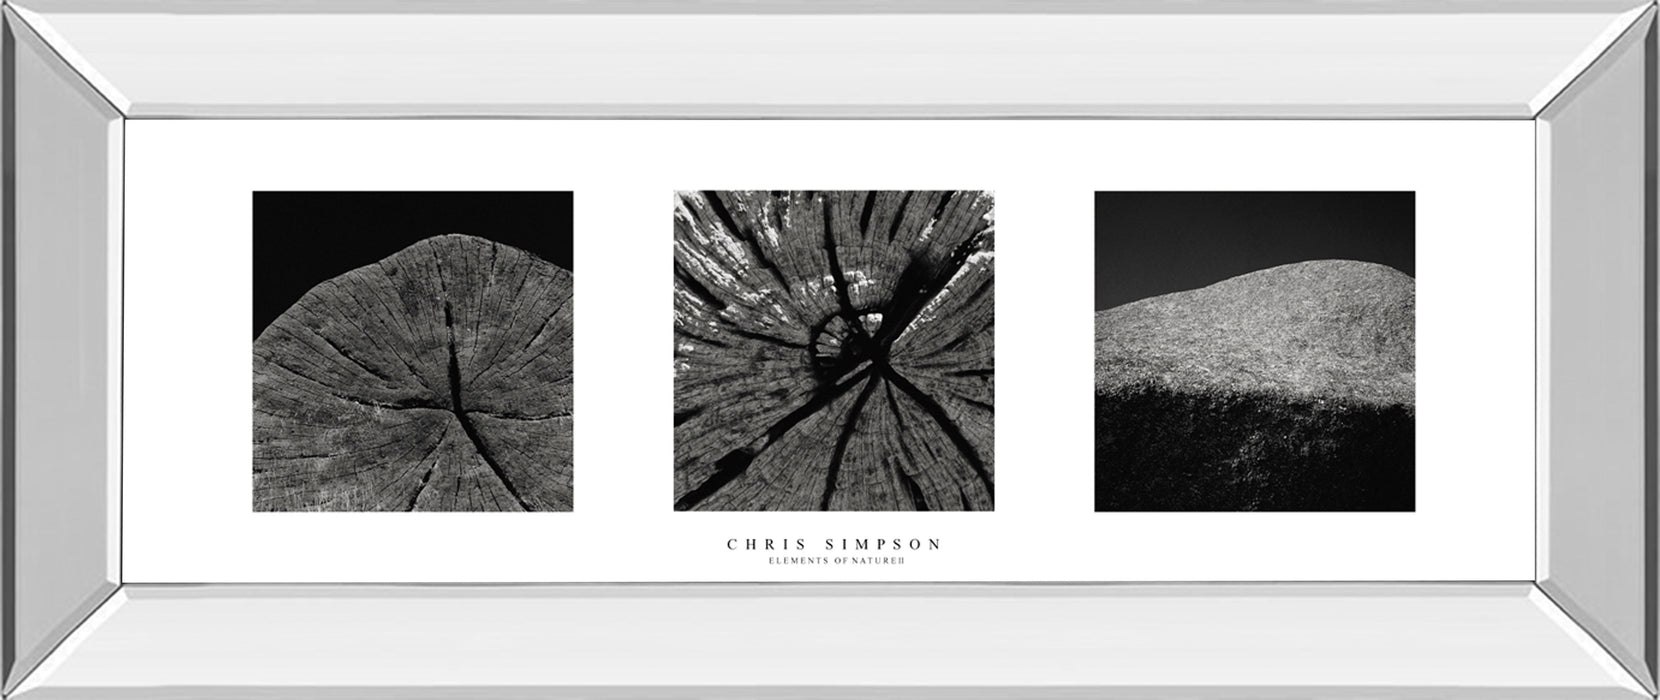 Elements Of Nature 2 By Chris Simpson - Mirror Framed Print Wall Art - Black